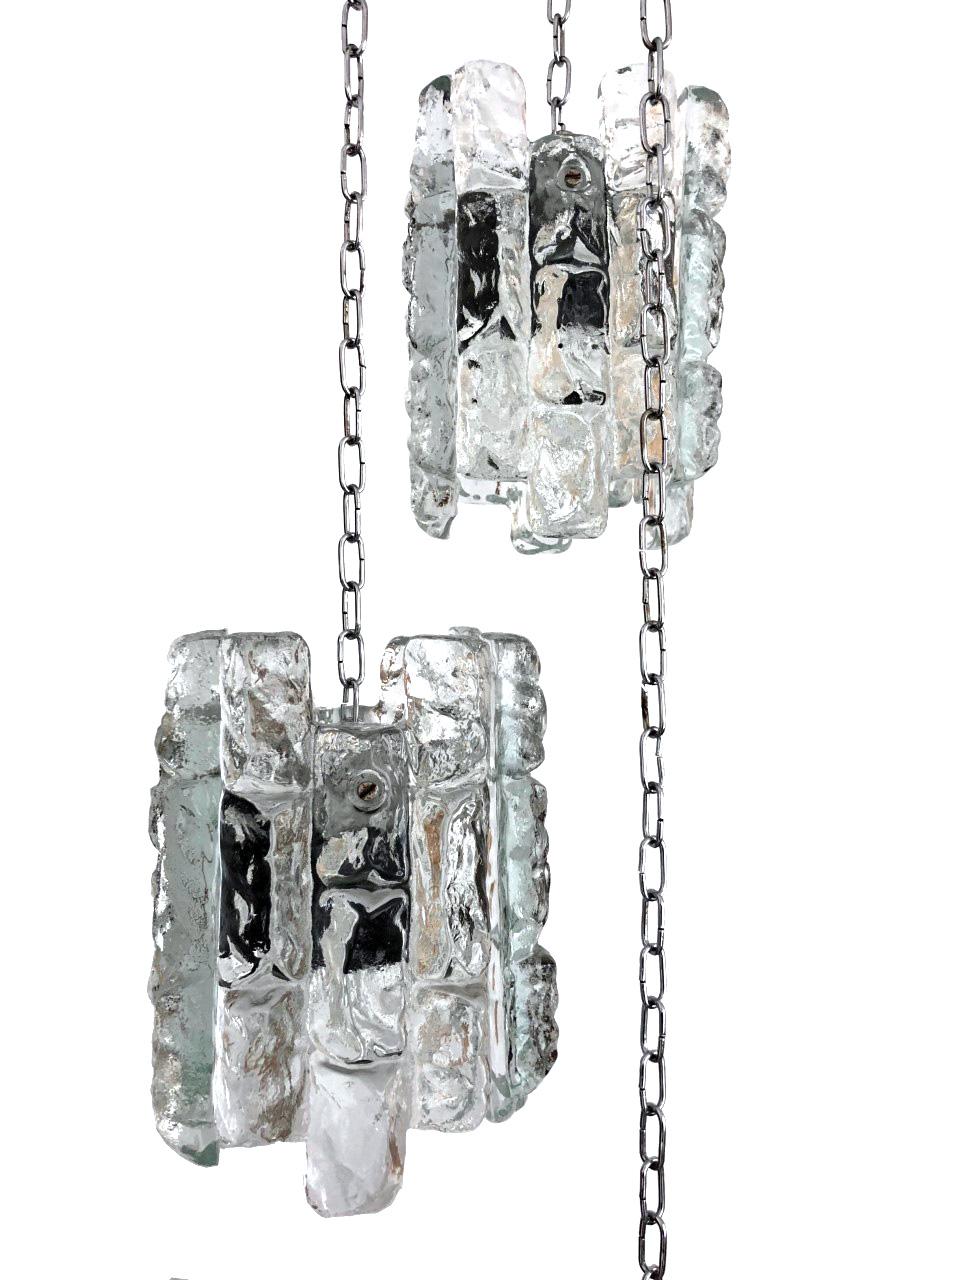 Beautiful Austrian midcentury ice-glass cascading chandelier.
This chandelier was made during the 1970s in Austria by Kalmar.
This piece is composed by 12 units of Ice-Glass (H 20 cm 7.87 in. x W 10 cm 3.94 in.) and metal structure.
This